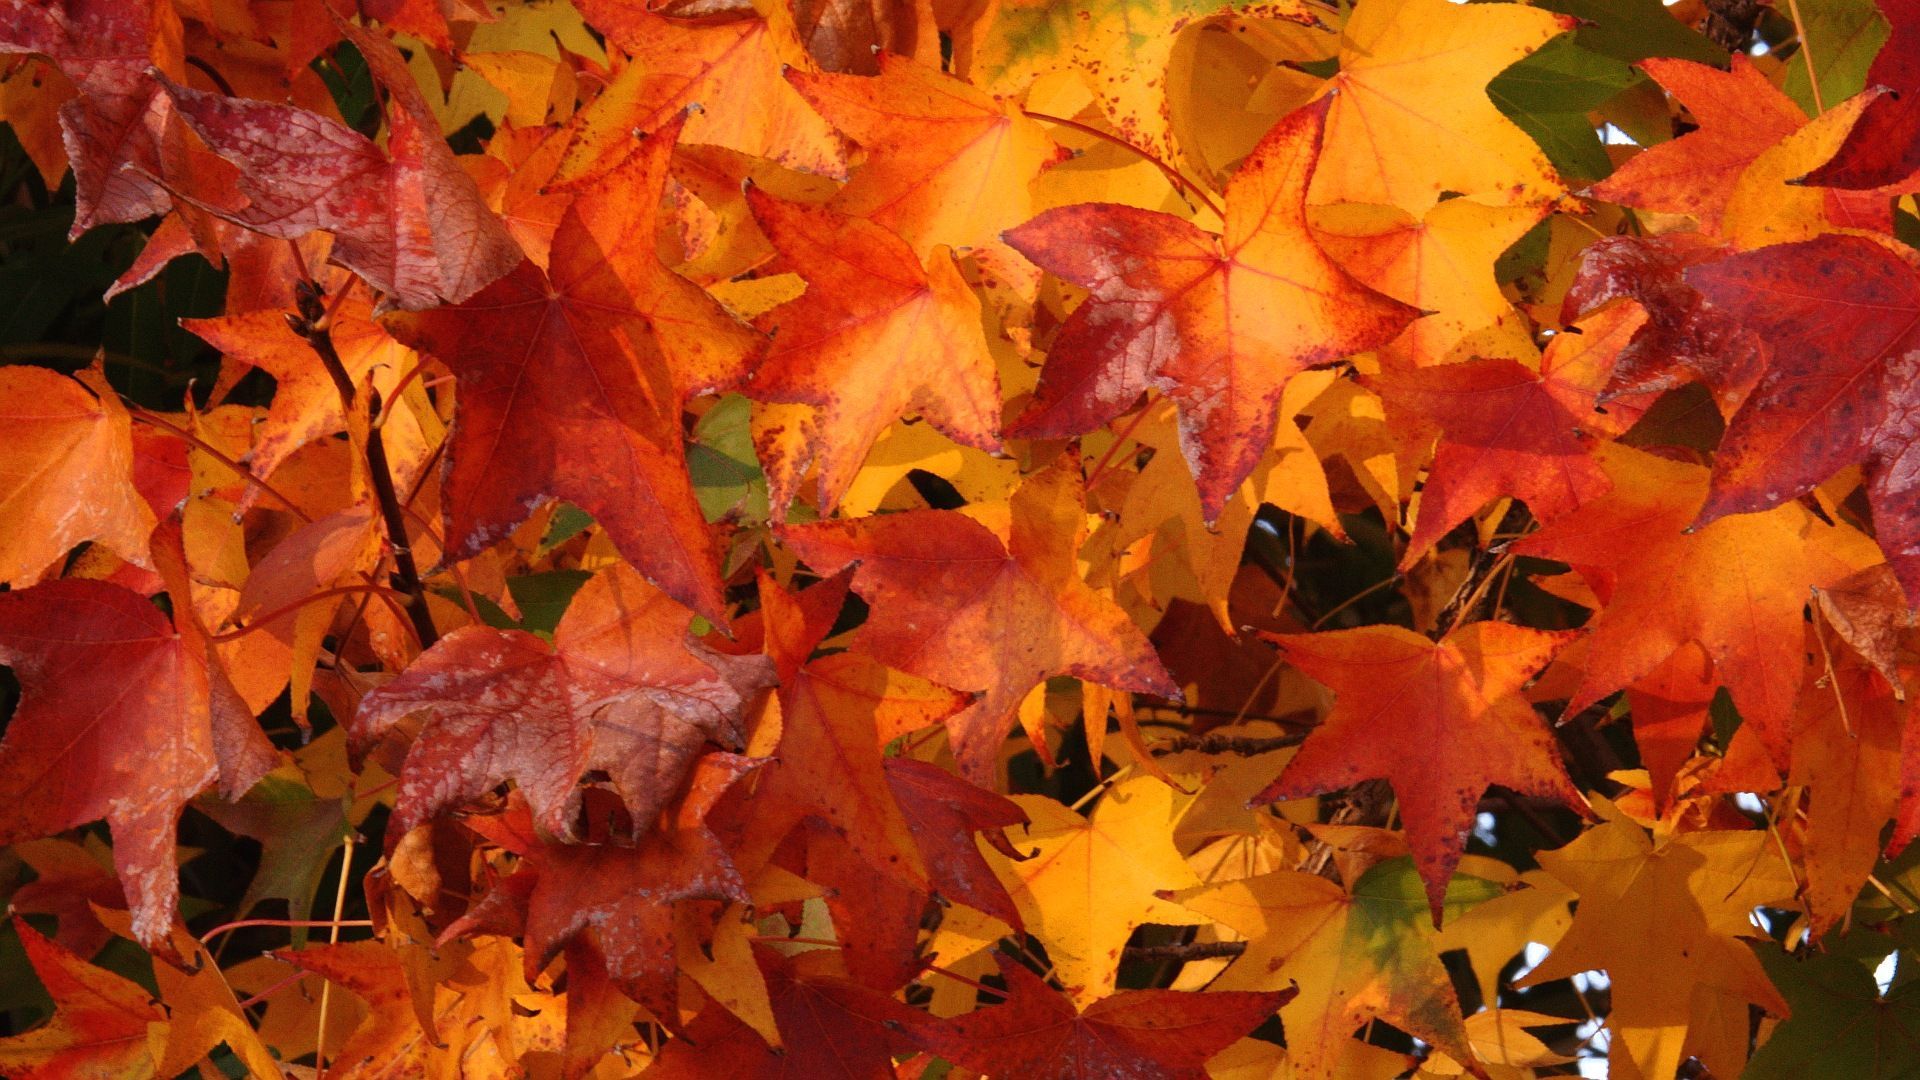 Fall Colors Background. Fall wallpaper, Autumn leaves wallpaper, Fall colors